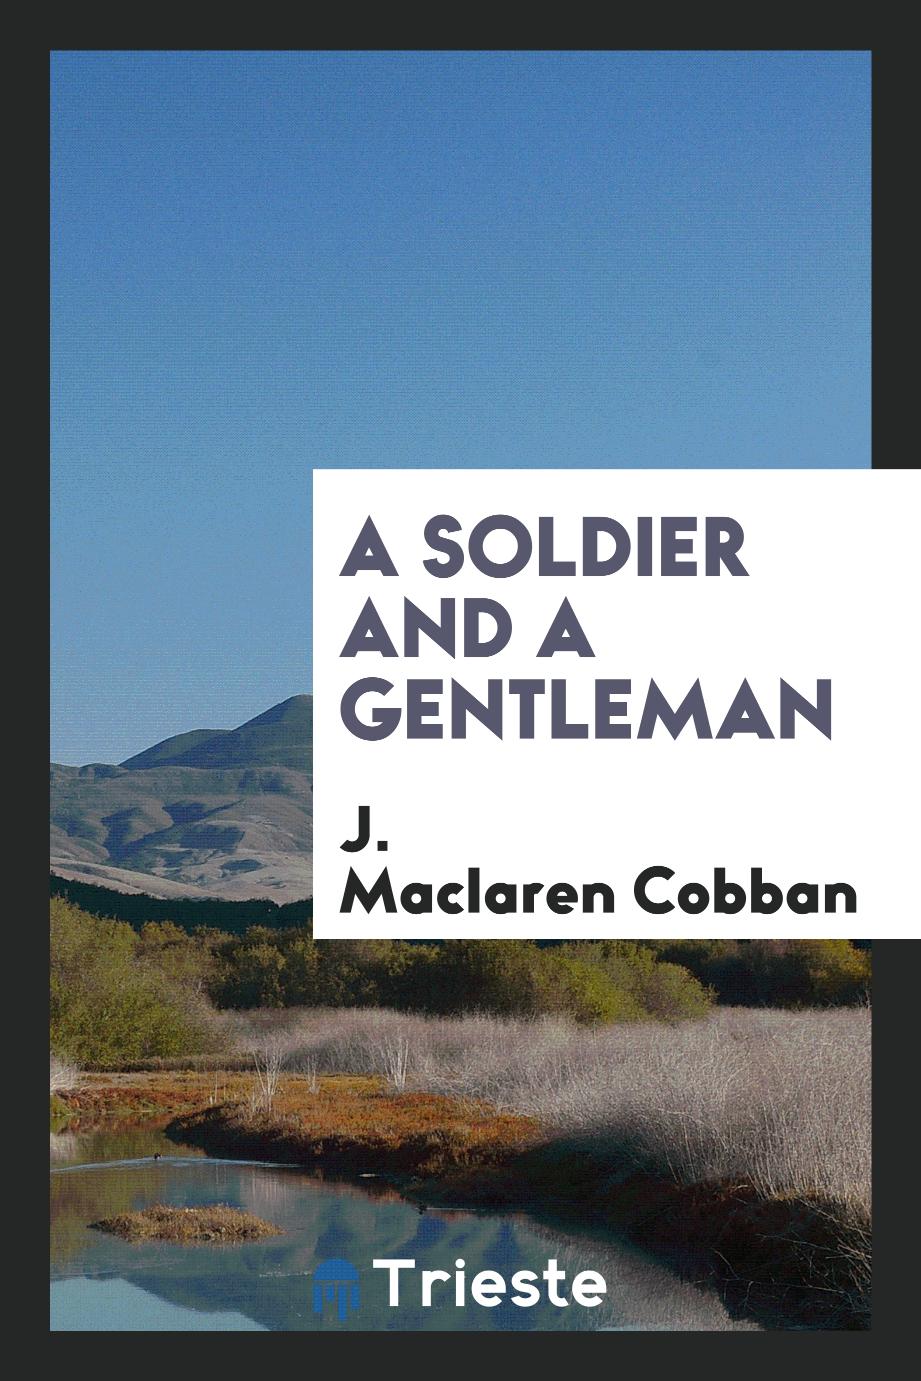 A Soldier and a Gentleman